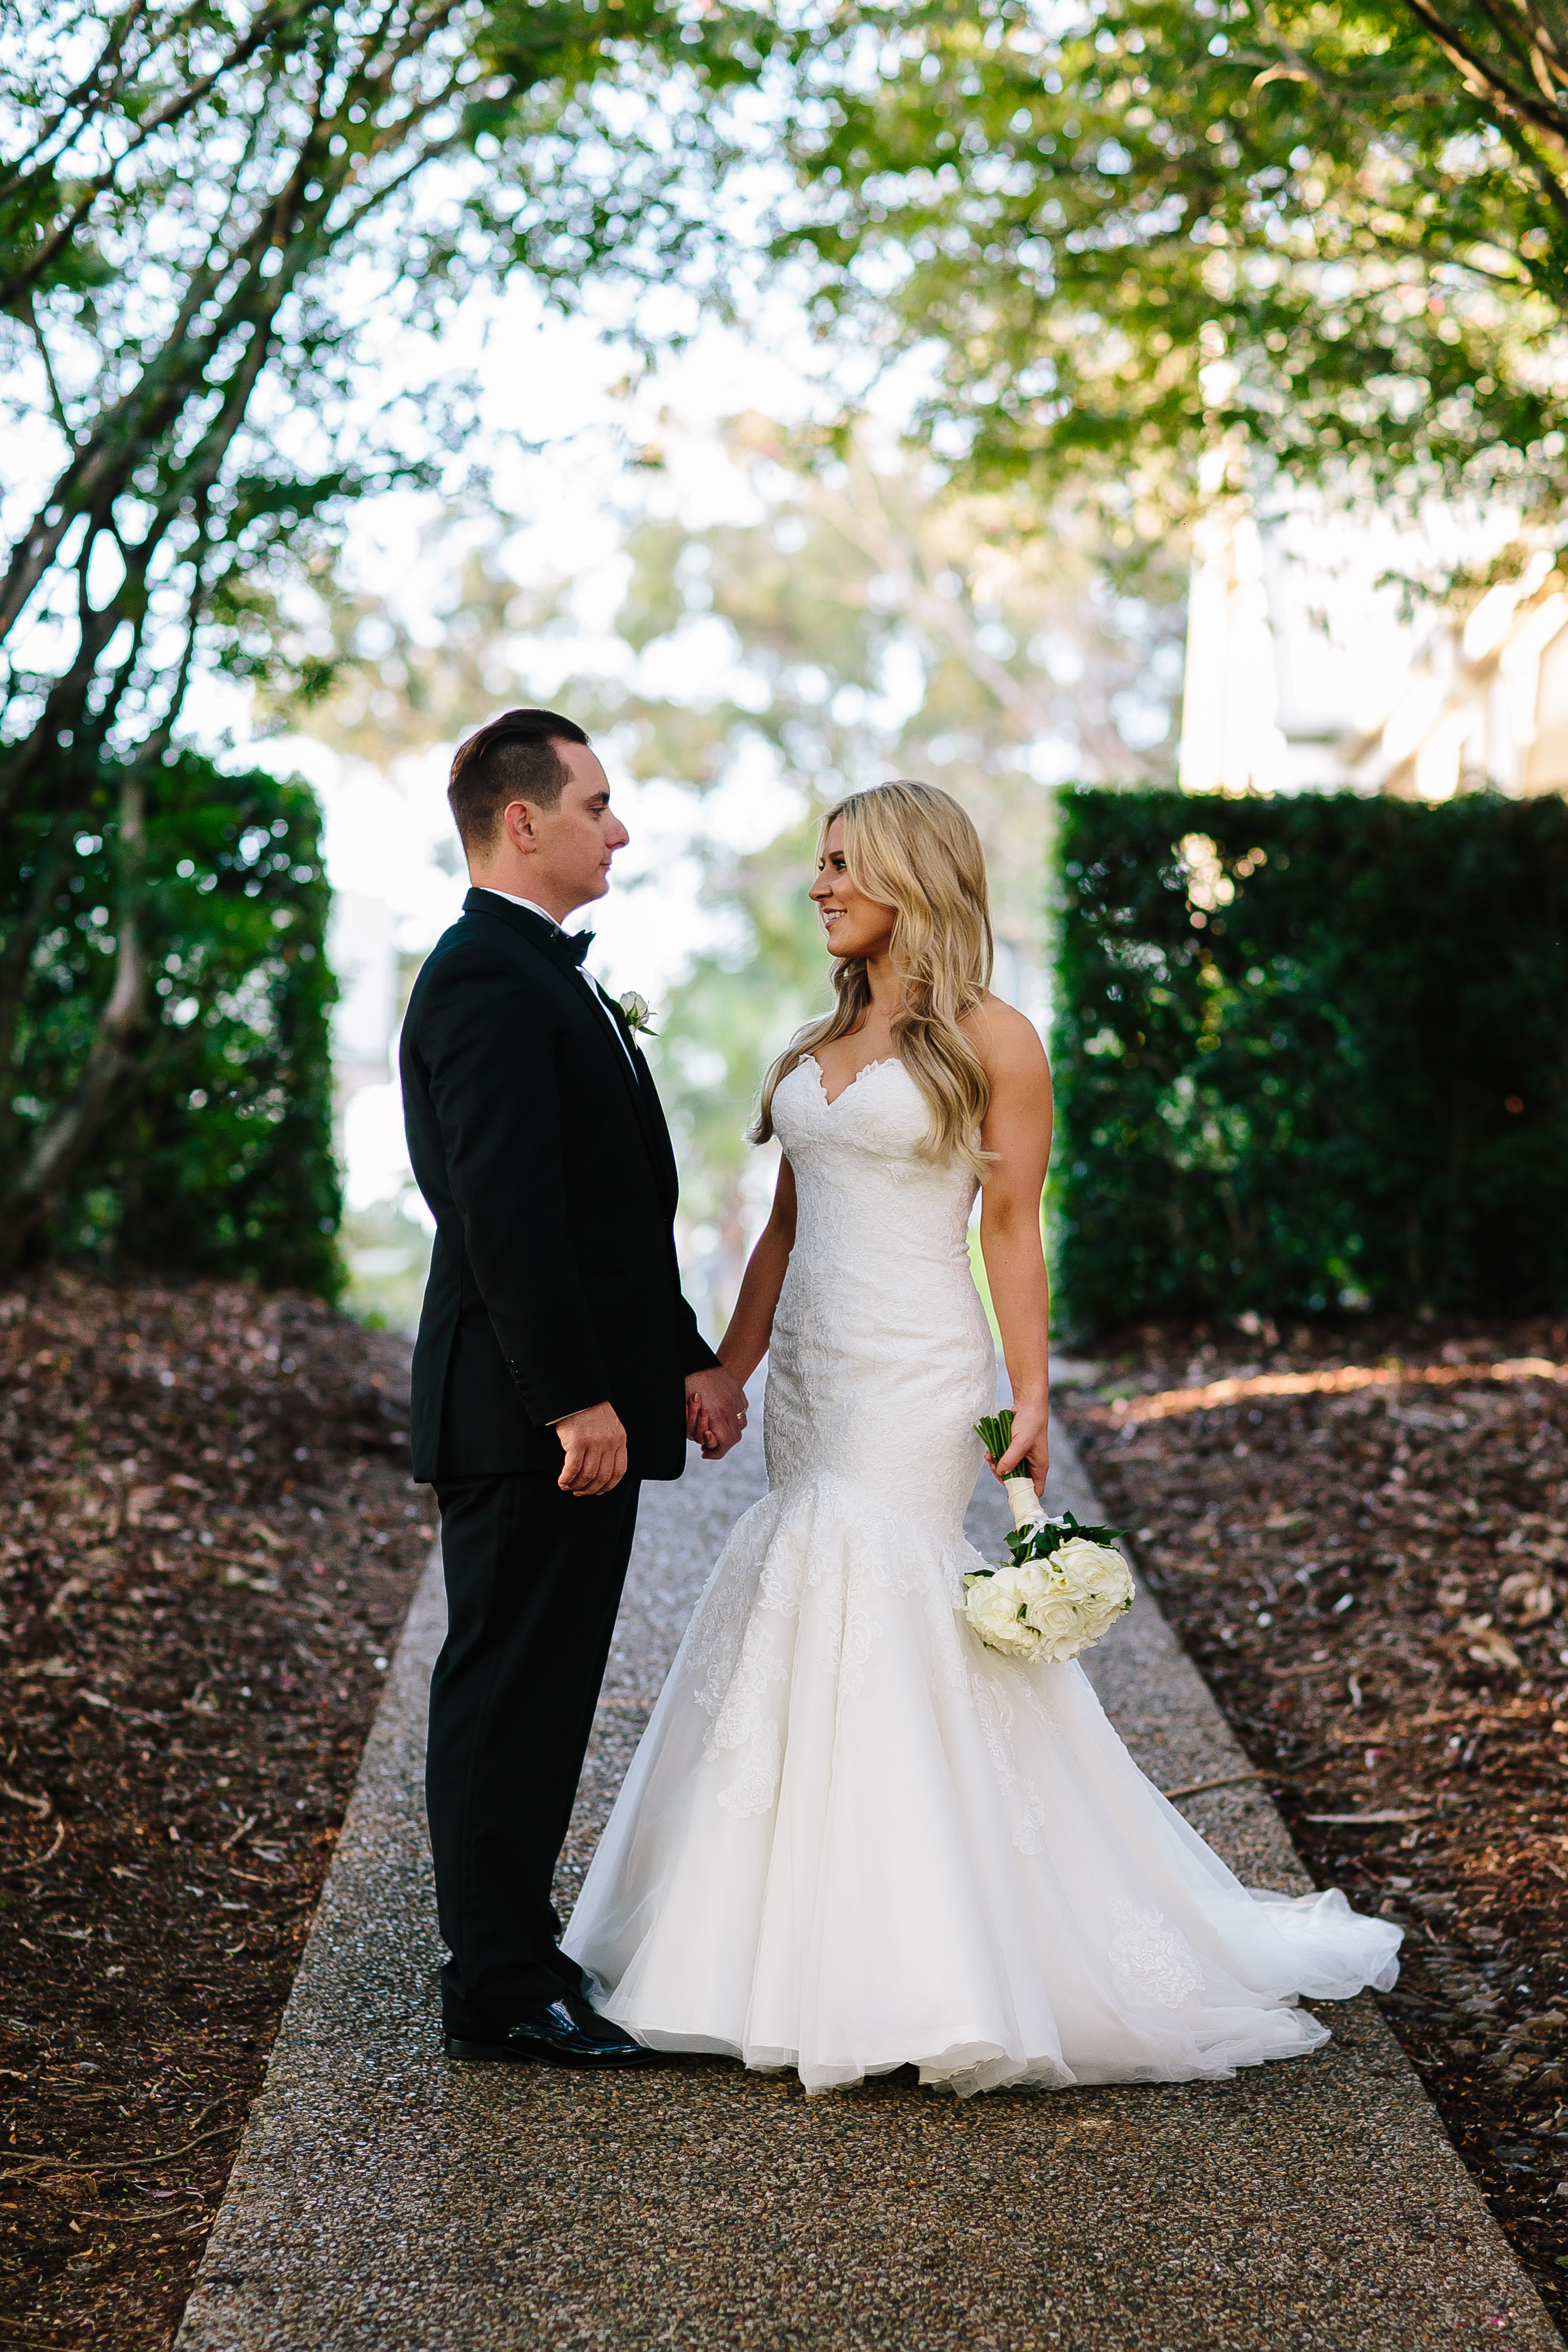 Bec and Callum tied the knot in a gorgeous ceremony at the Intercontinental Cove Sanctuary Hotel in 2018. This beautiful wedding followed a classy and modern theme that was full of romance. We sat down with Bec, the lovely bride, to find out a little bit more about their love story and big day! Take a look into this gorgeous glass chapel wedding…